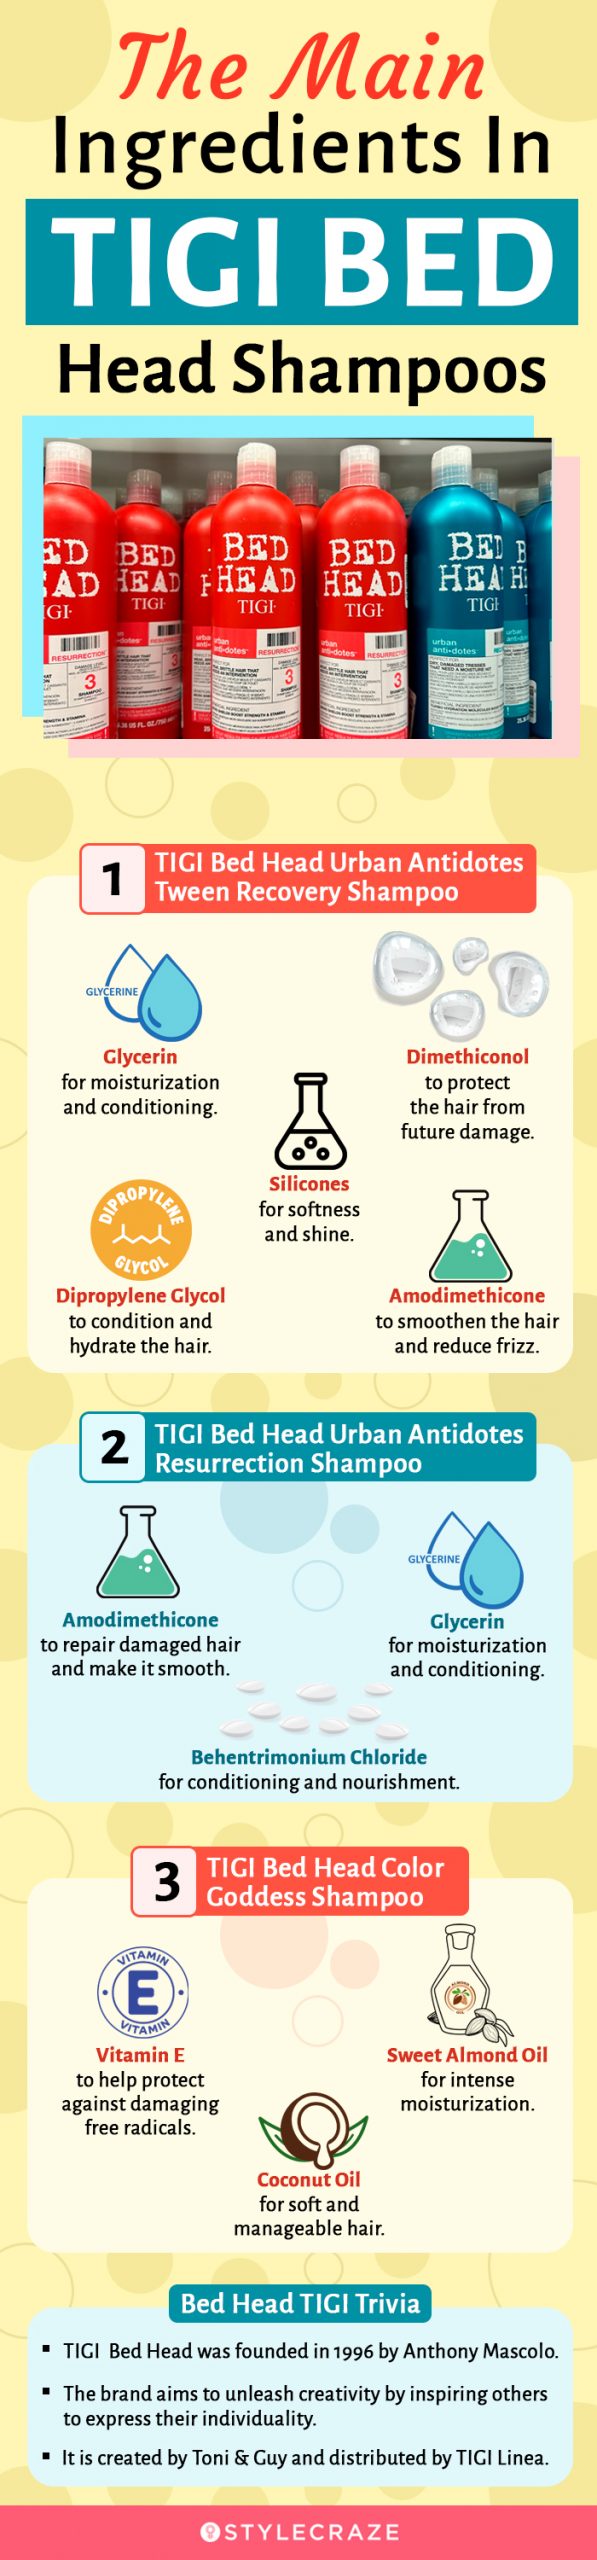 The Main Ingredients In TIGI Bed Head Shampoos [infographic]